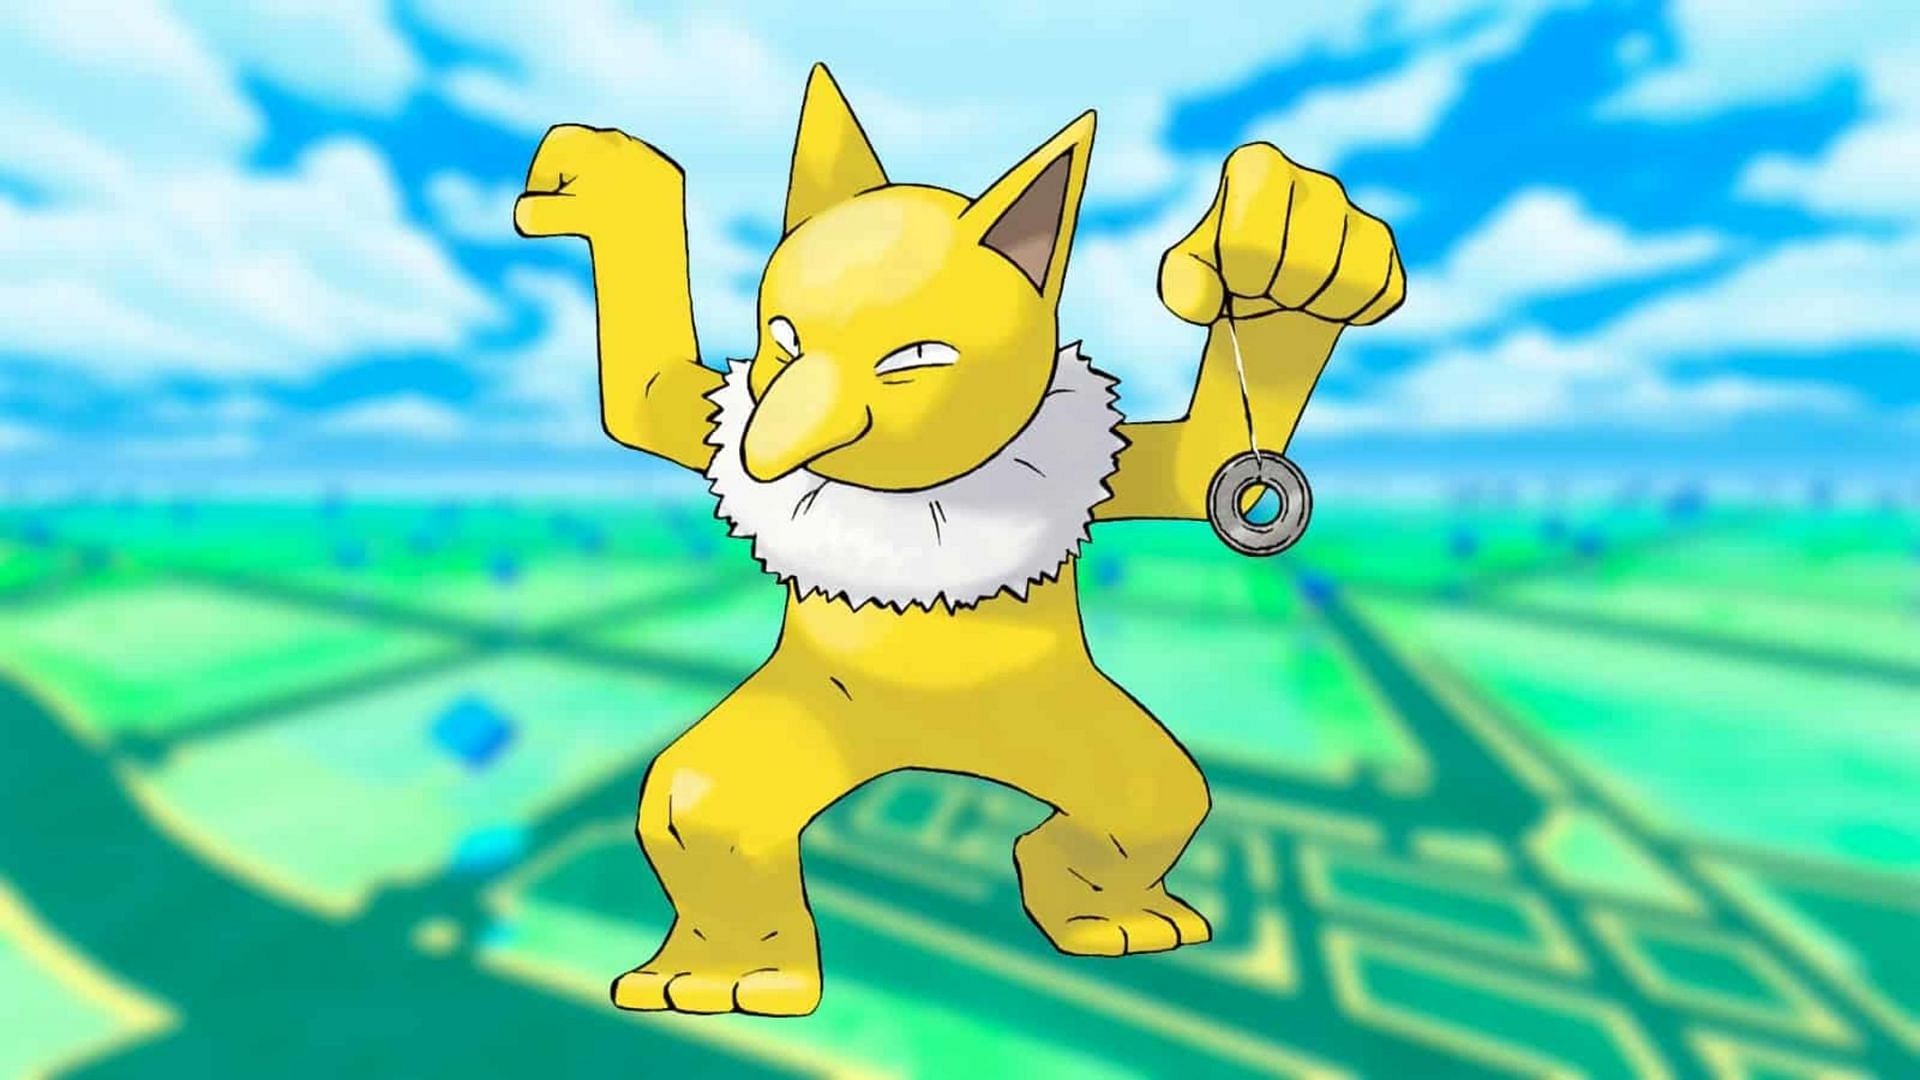 Hypno is one of the best picks for Great League PvP (Image via Niantic)